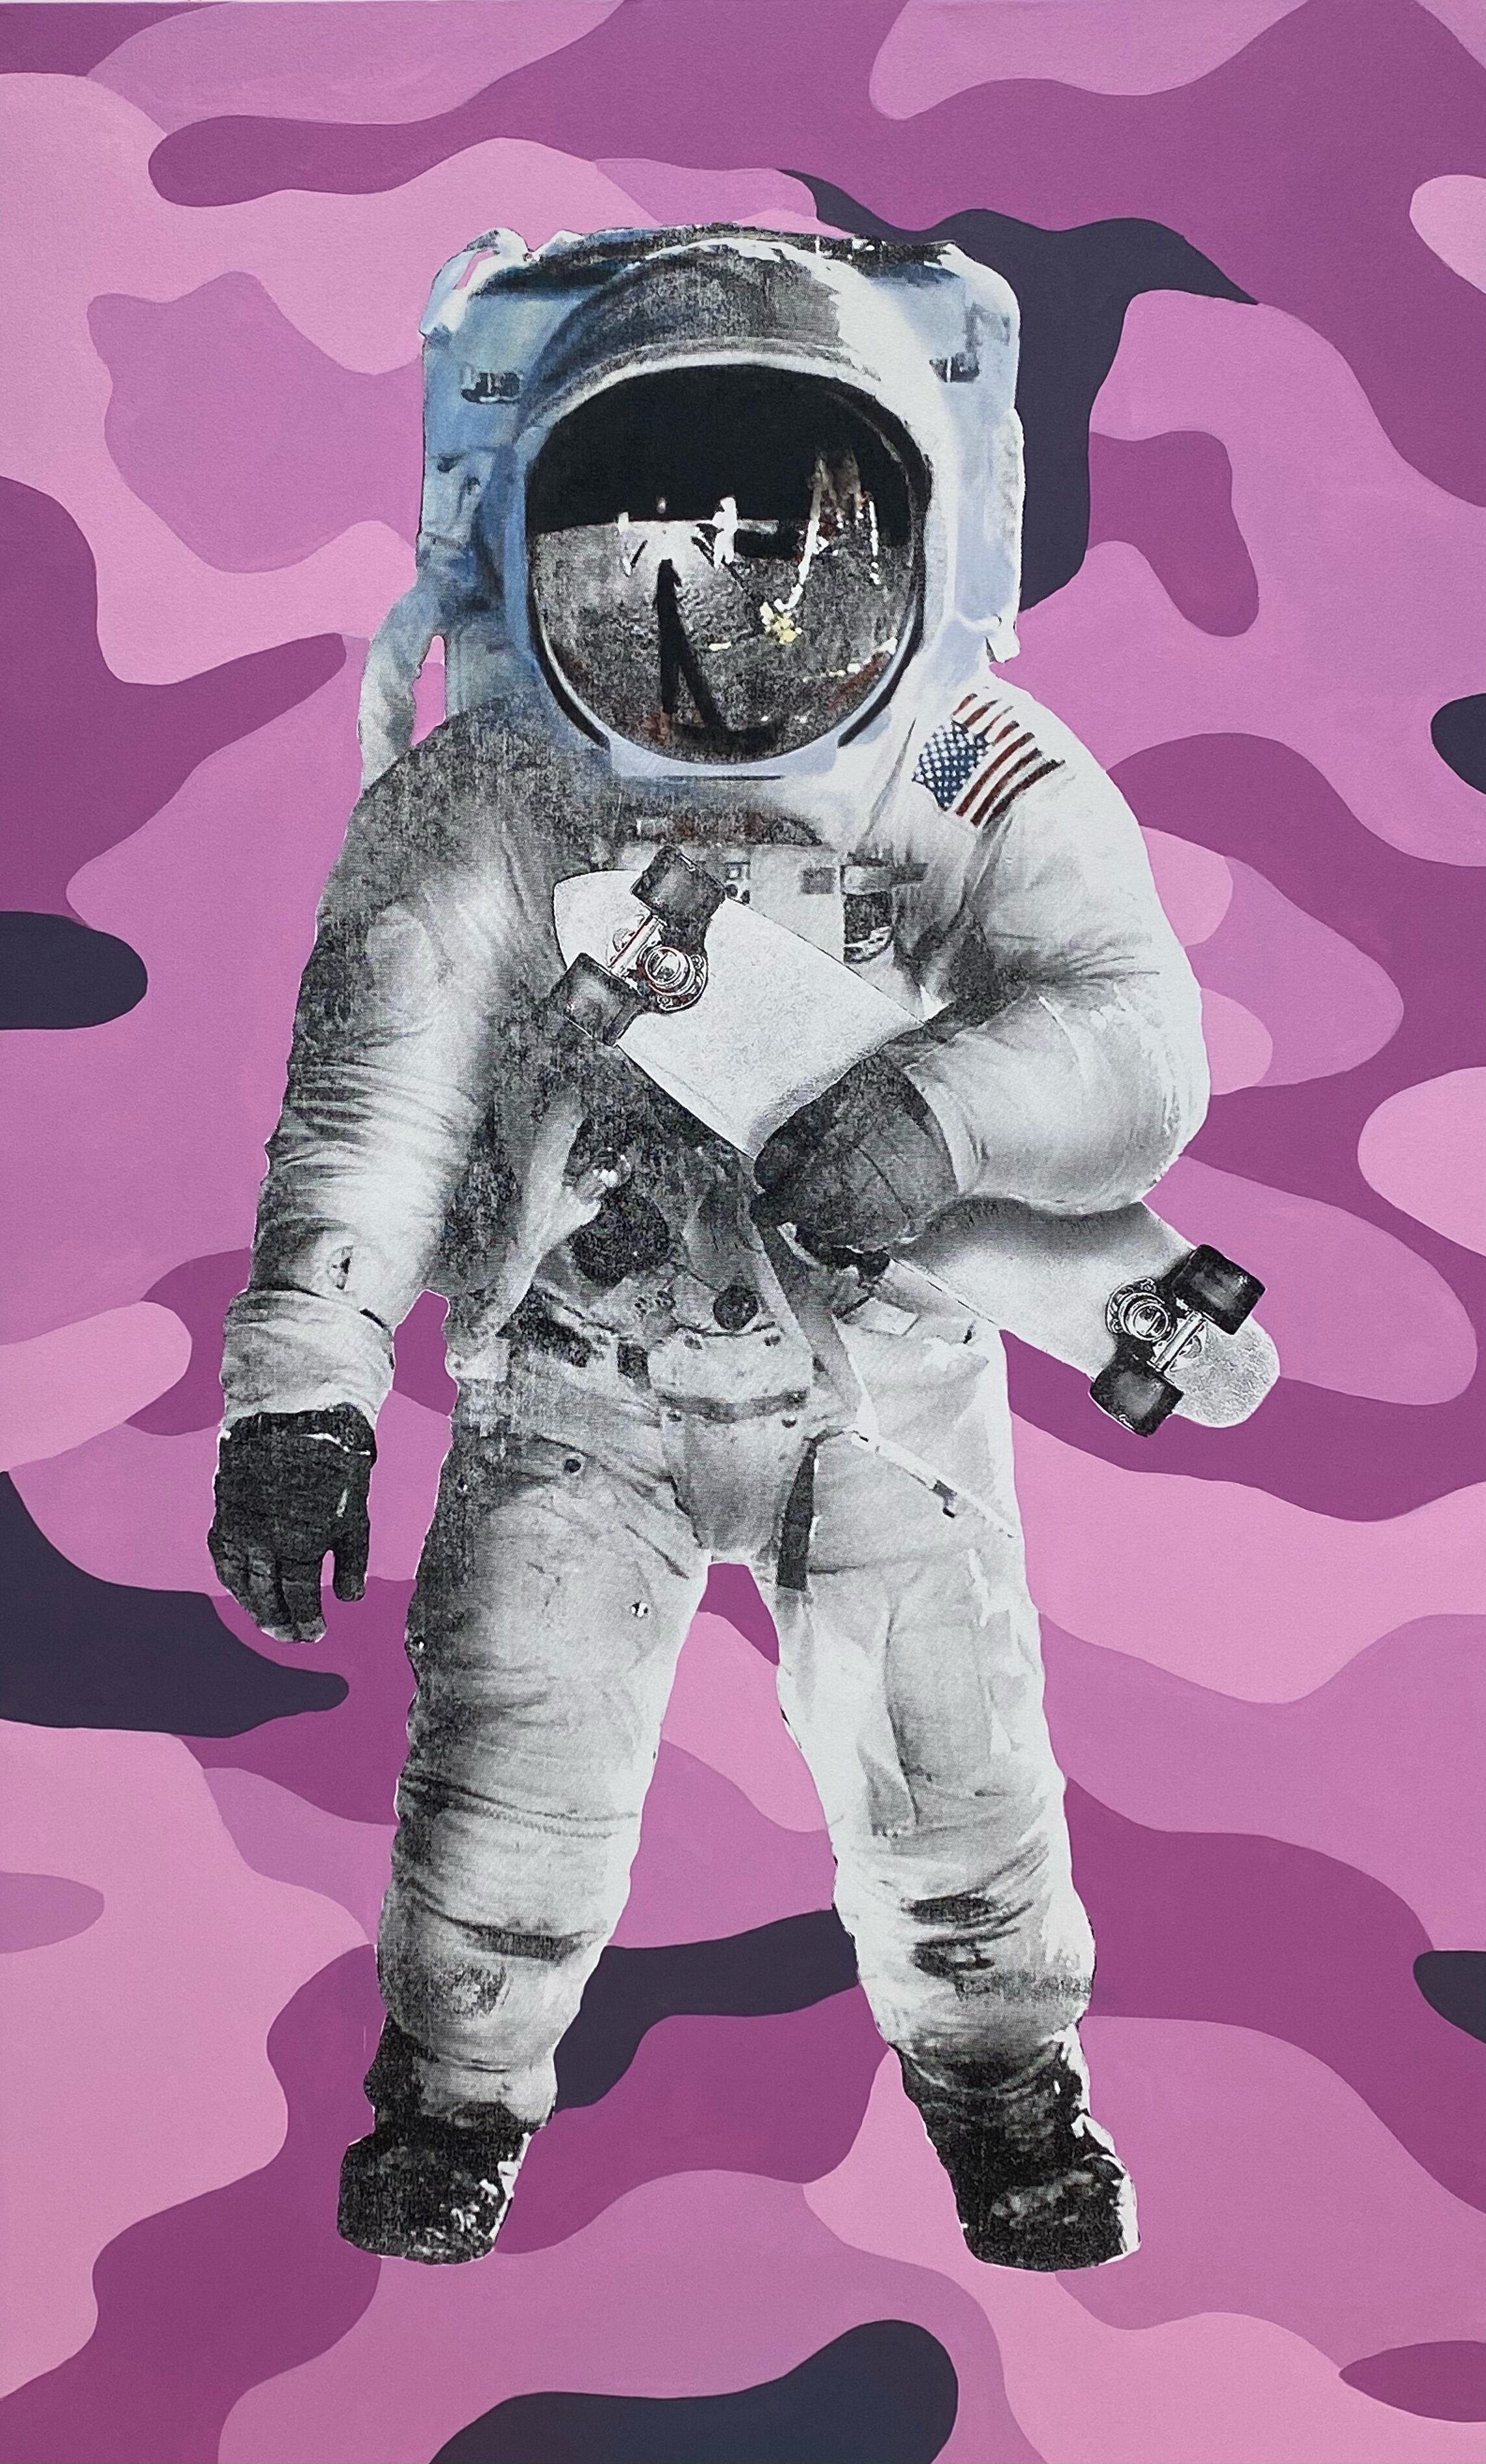   Camo Spaceboarder (Purple), 2021   Screen print and acrylic on canvas, 78 x 48 inches 